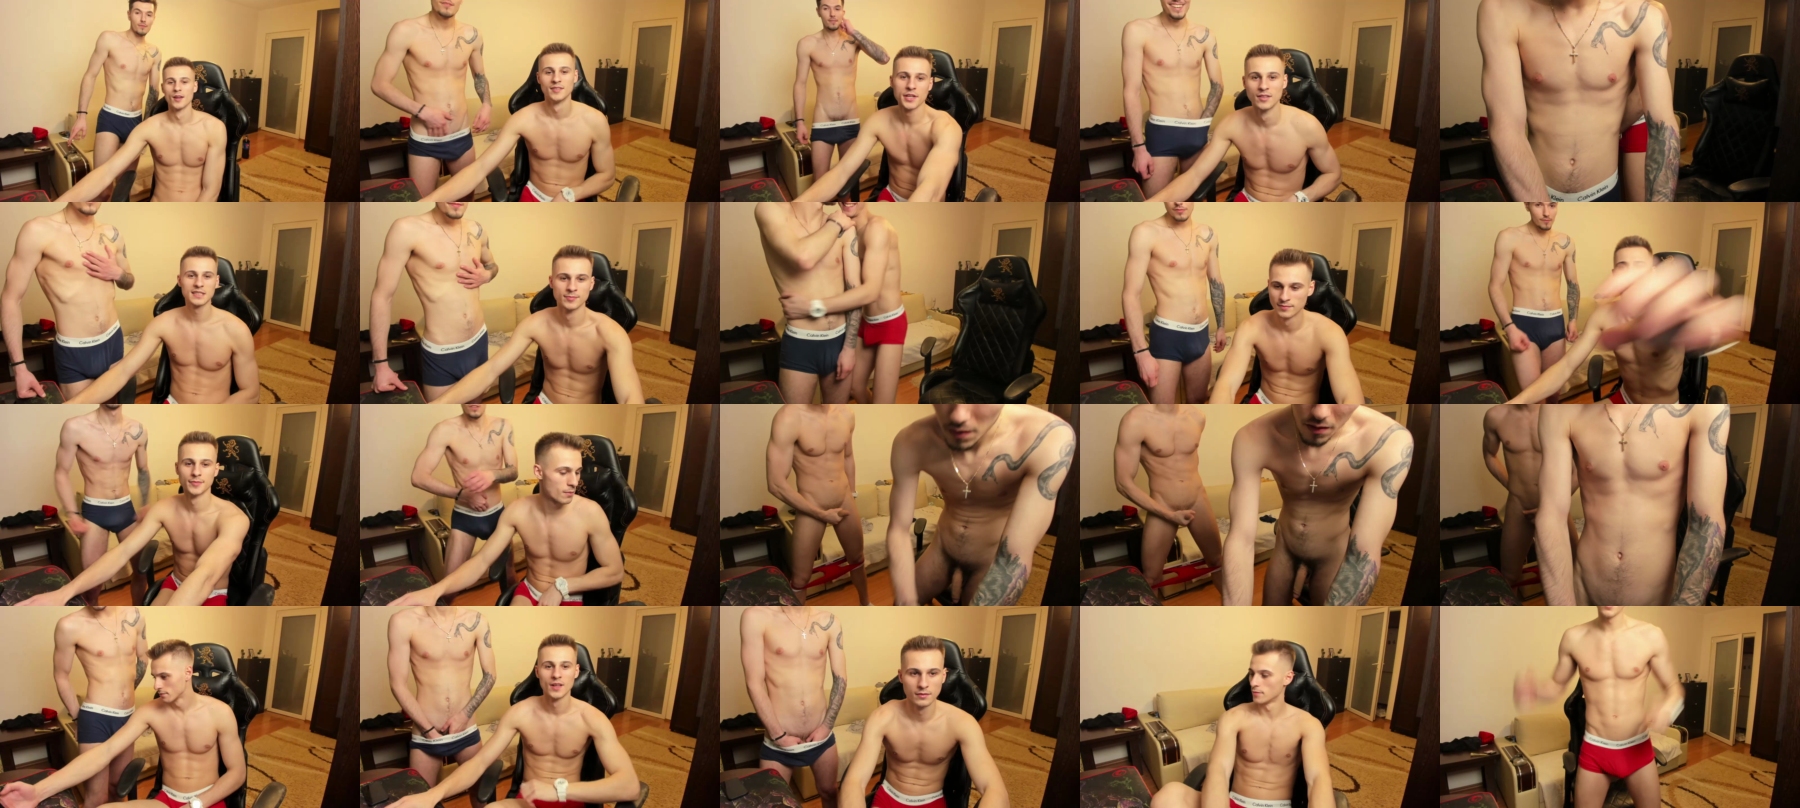 Awesome_Justin Recorded CAM SHOW @ Chaturbate 29-10-2021